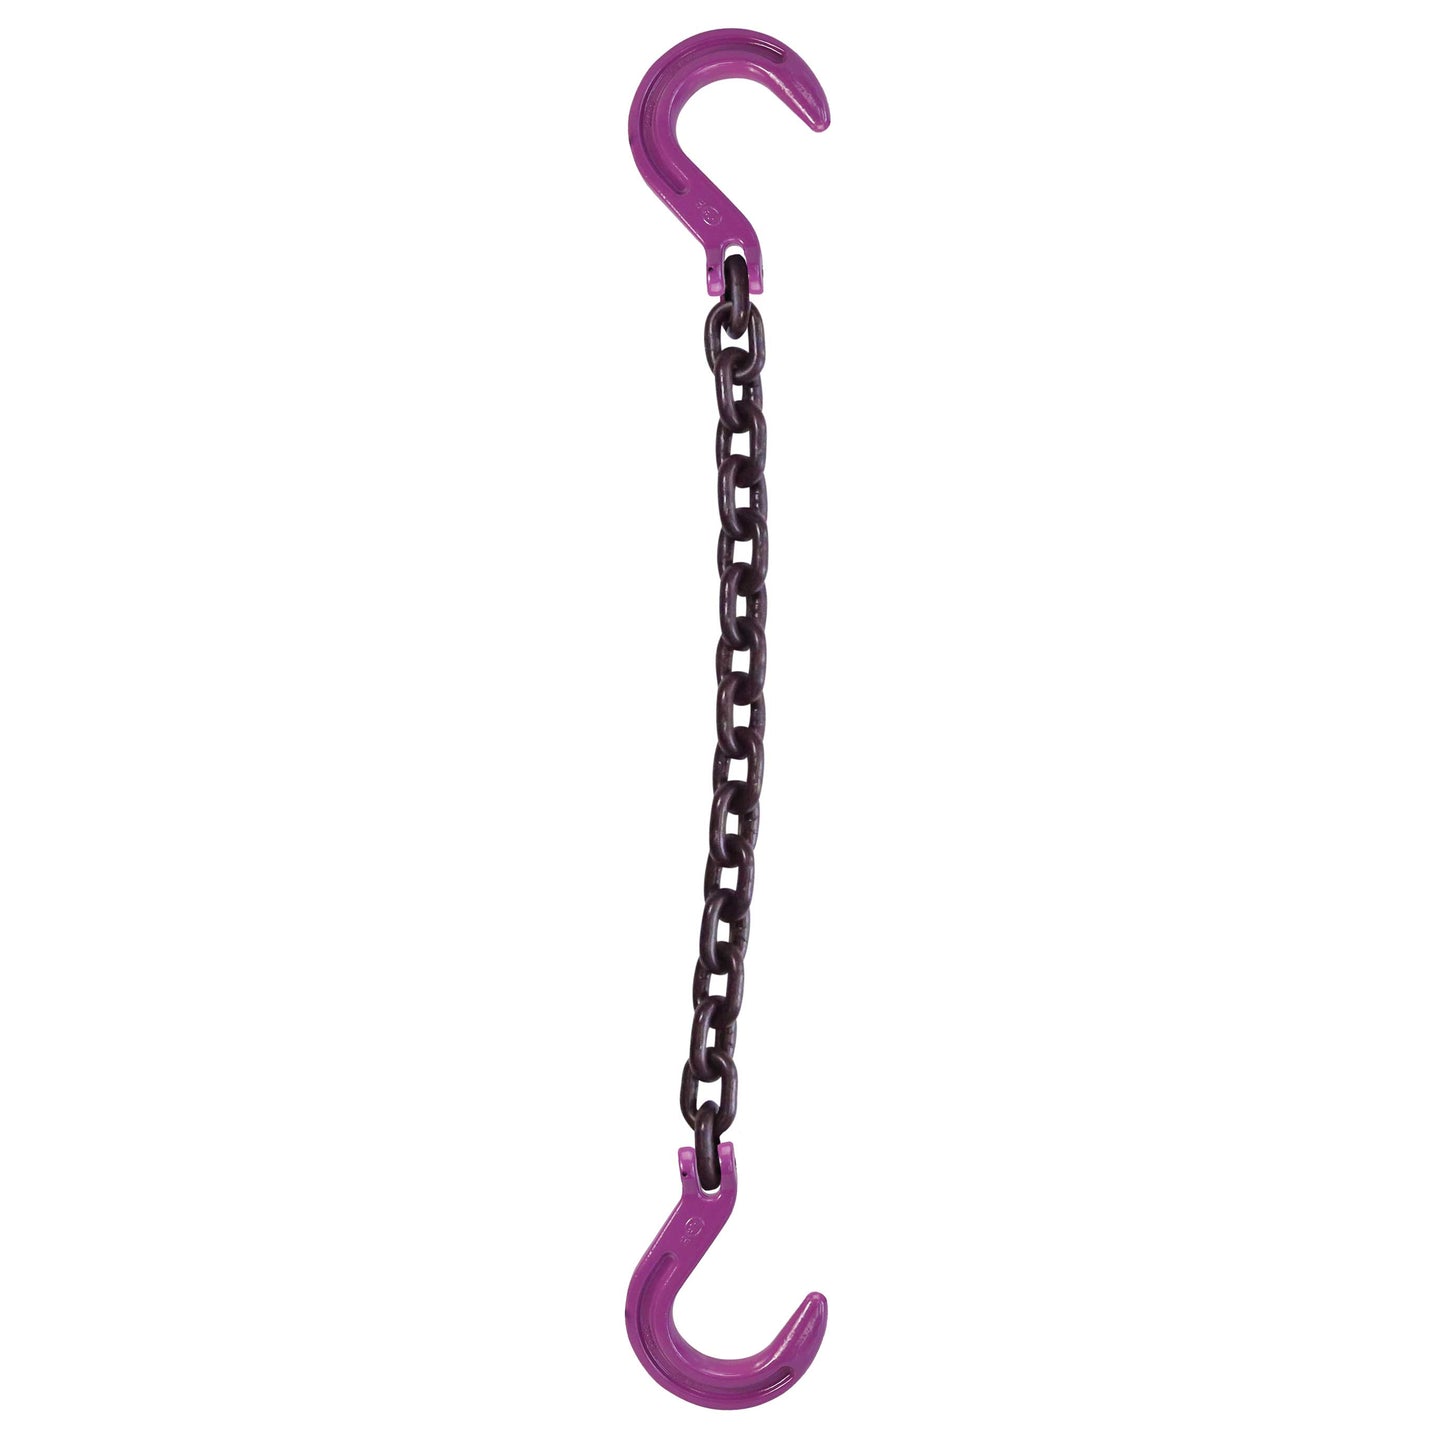 12 inch x 8 foot Single Leg Chain Sling w Foundry & Foundry Hooks Grade 100 image 1 of 2